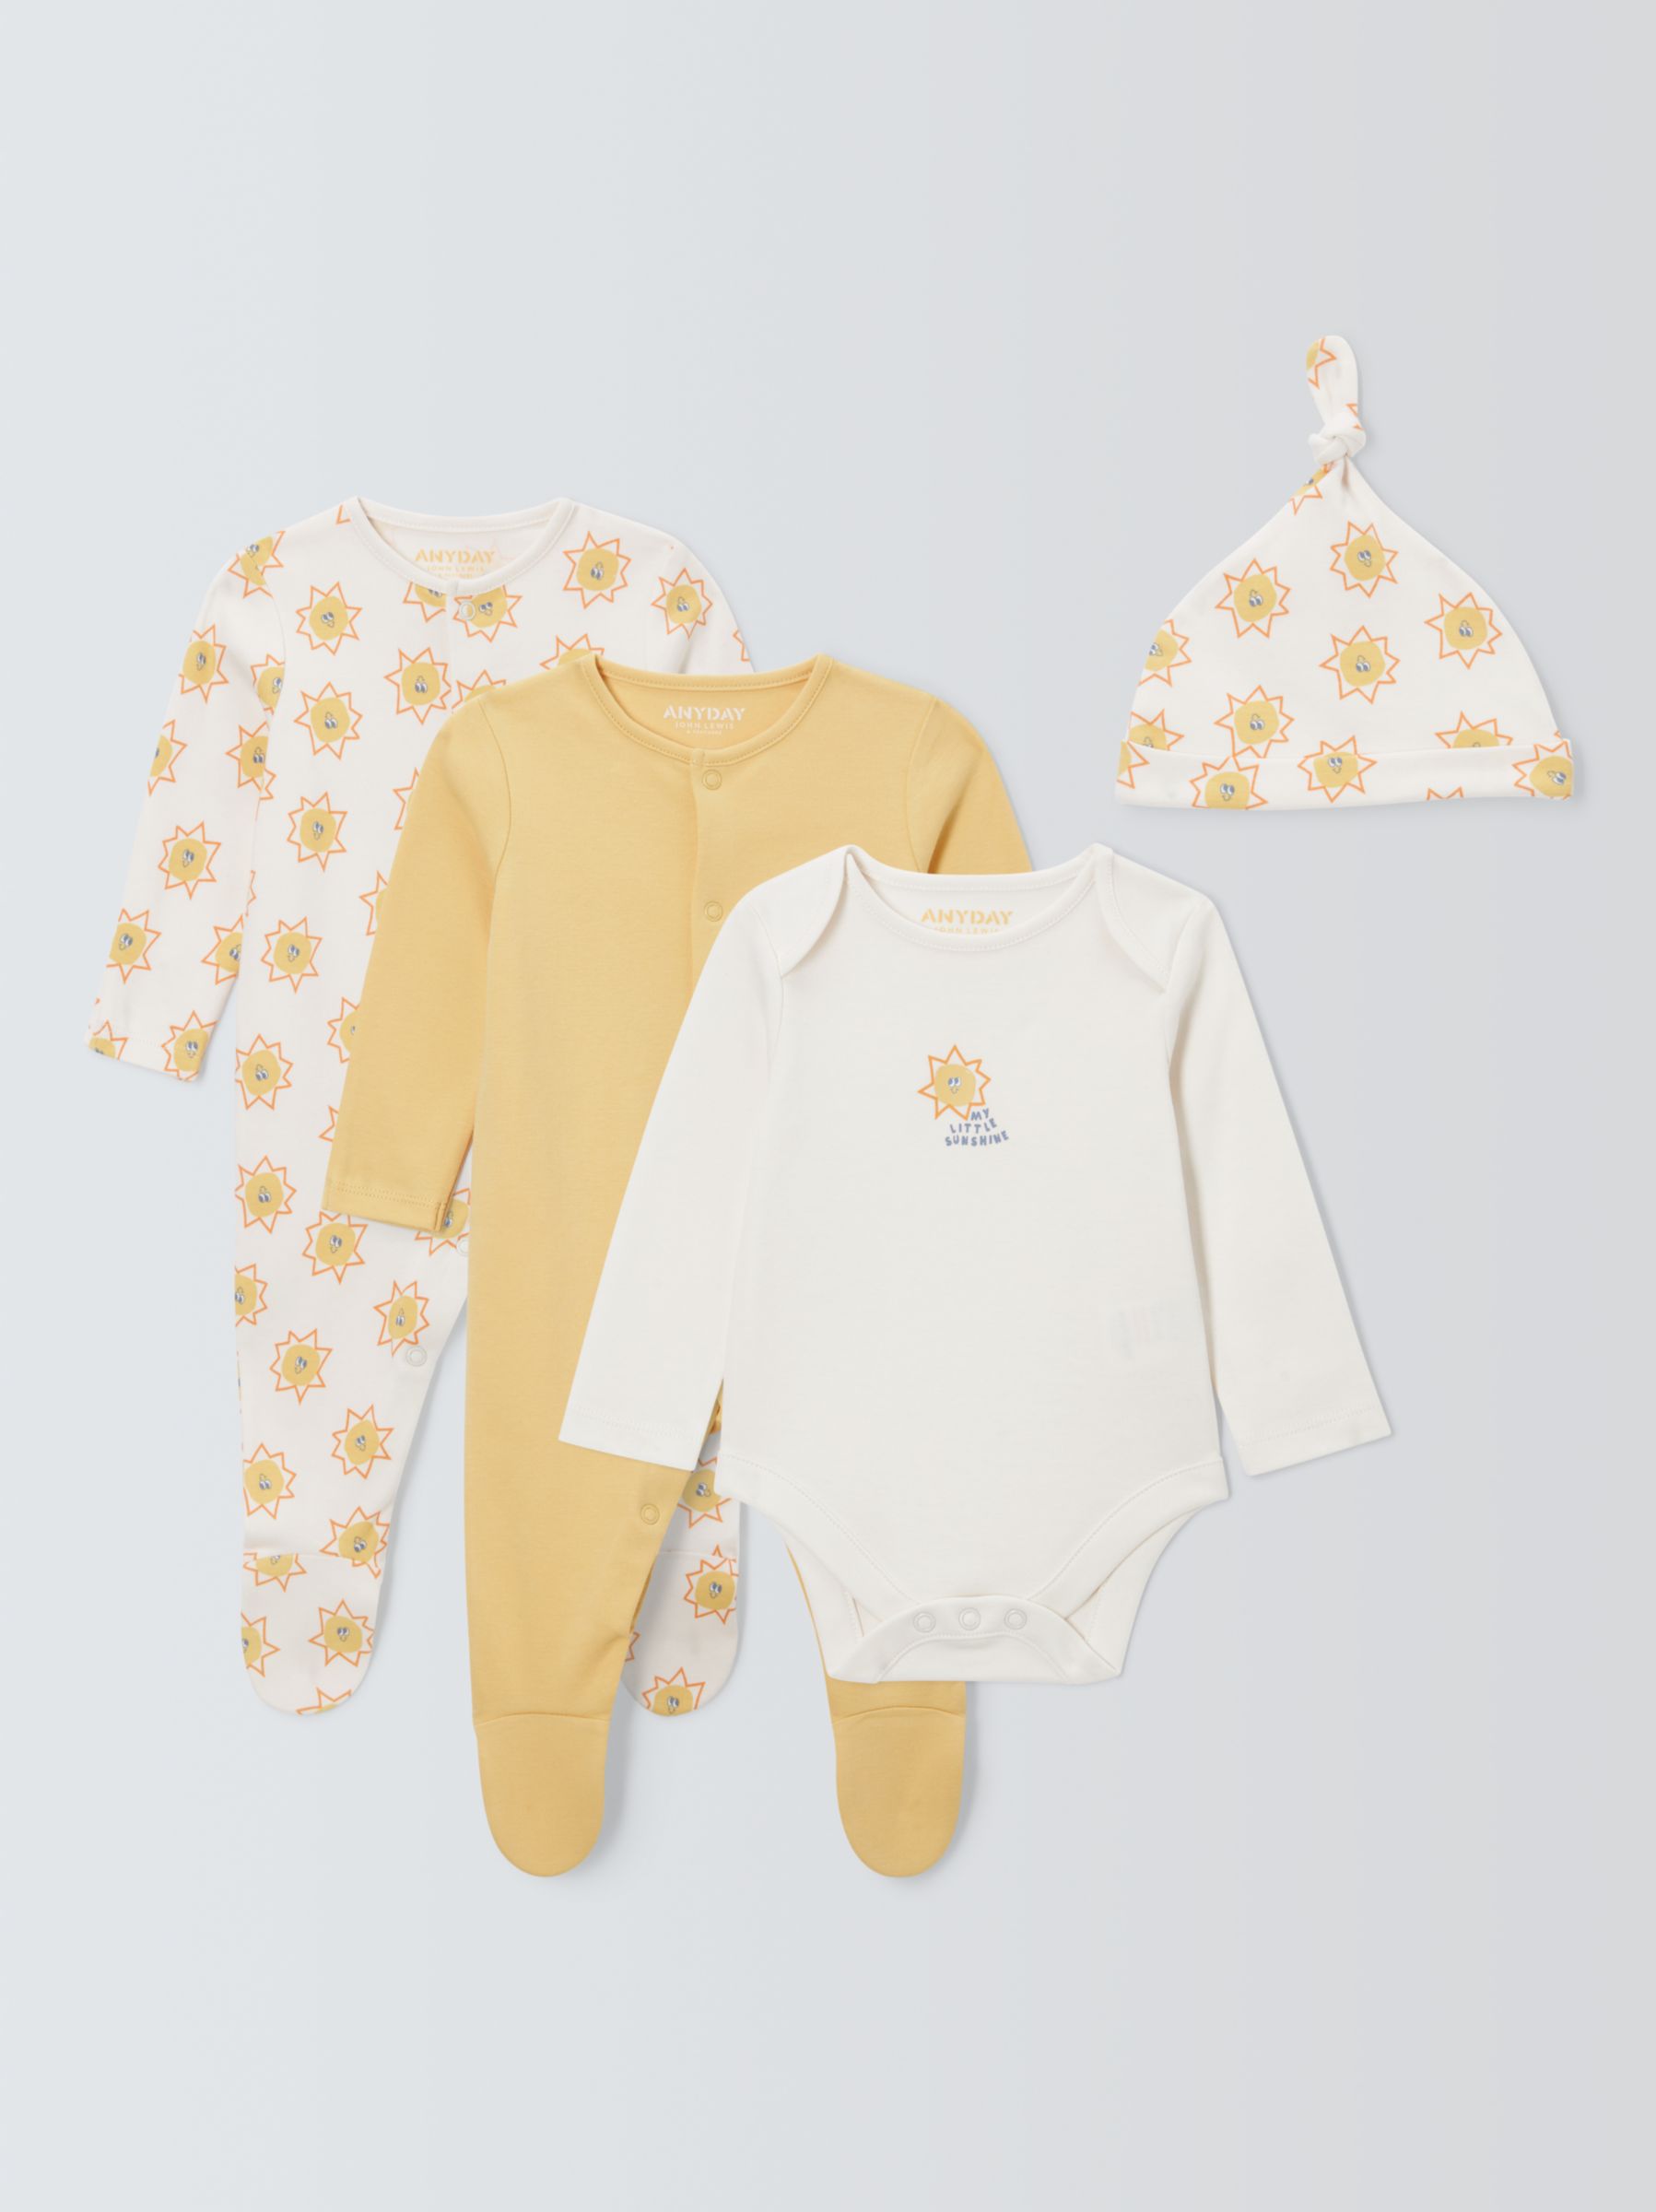 John Lewis ANYDAY Baby Sunflower Sleepsuit, Bodysuit and Hat Set, Yellow, 3-6 months